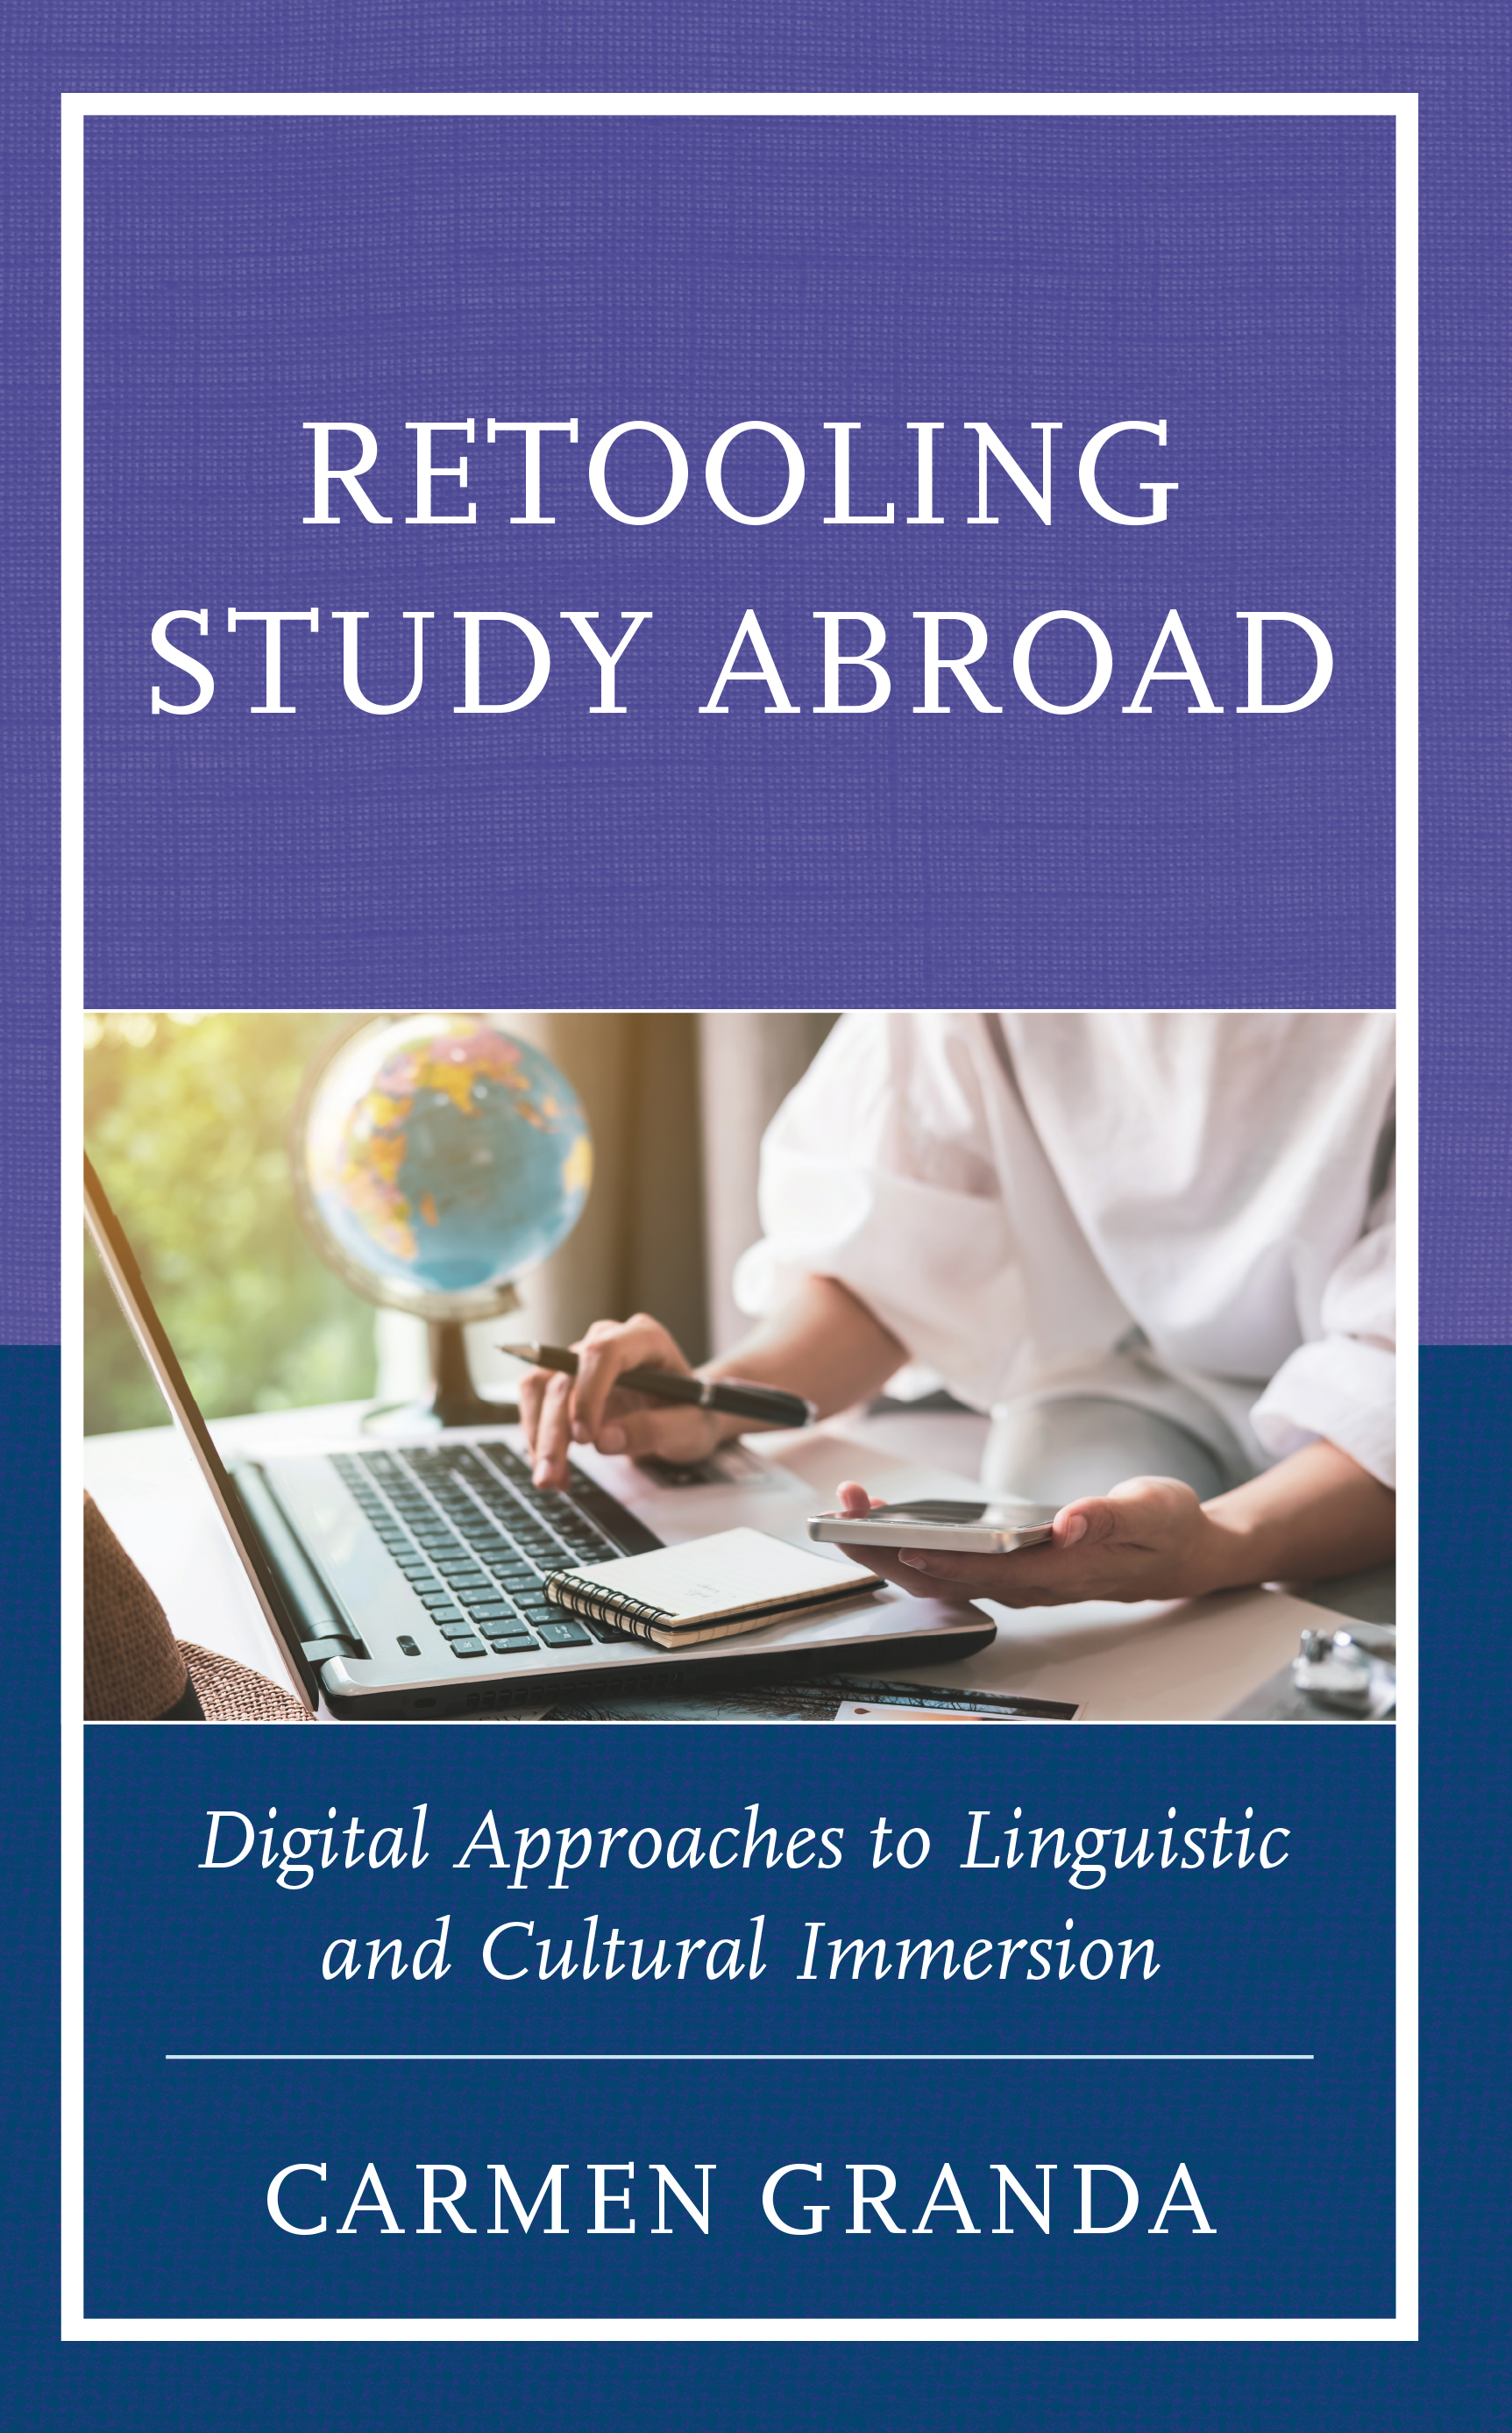 Retooling Study Abroad: Digital Approaches to Linguistic and Cultural Immersion